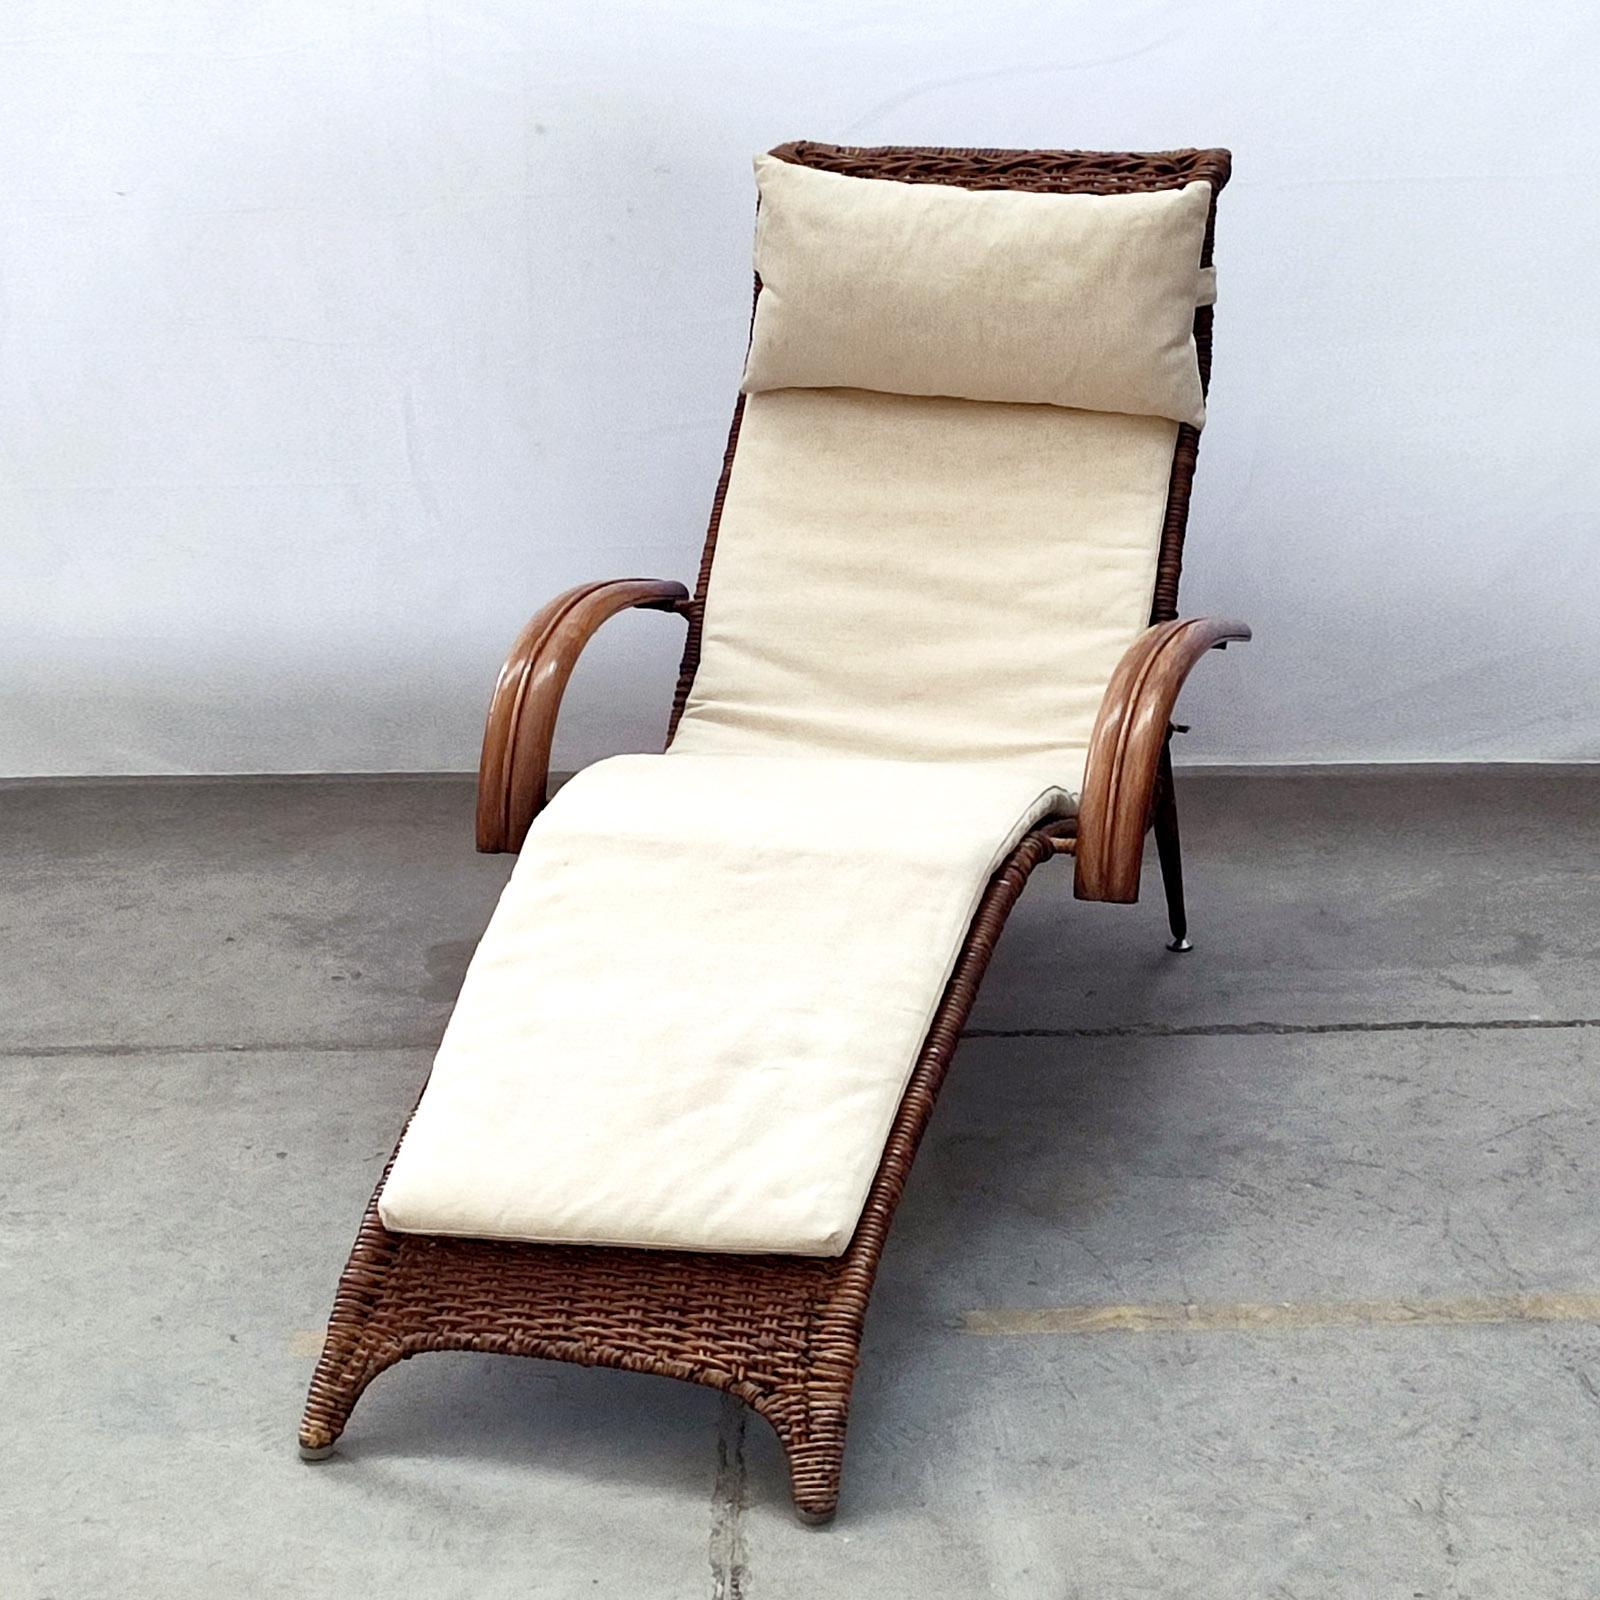 Mid-Century Modern Mid-Century, Sculptural Italian Rattan and Bamboo Chaise Longue Lounge Chair For Sale